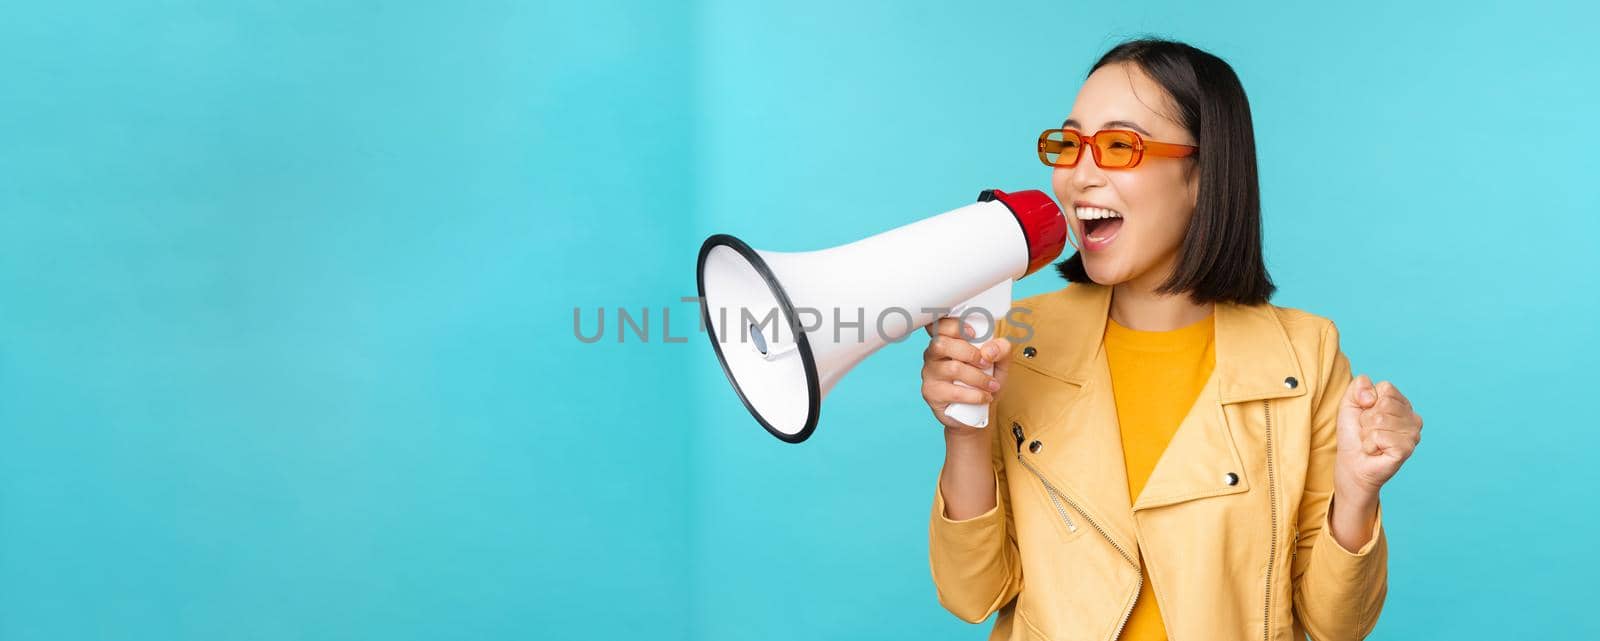 Young enthusiastic korean girl in trendy outfit, shouting in megaphone, making announcement, advertising, screaming in speakerphone, standing over blue background.